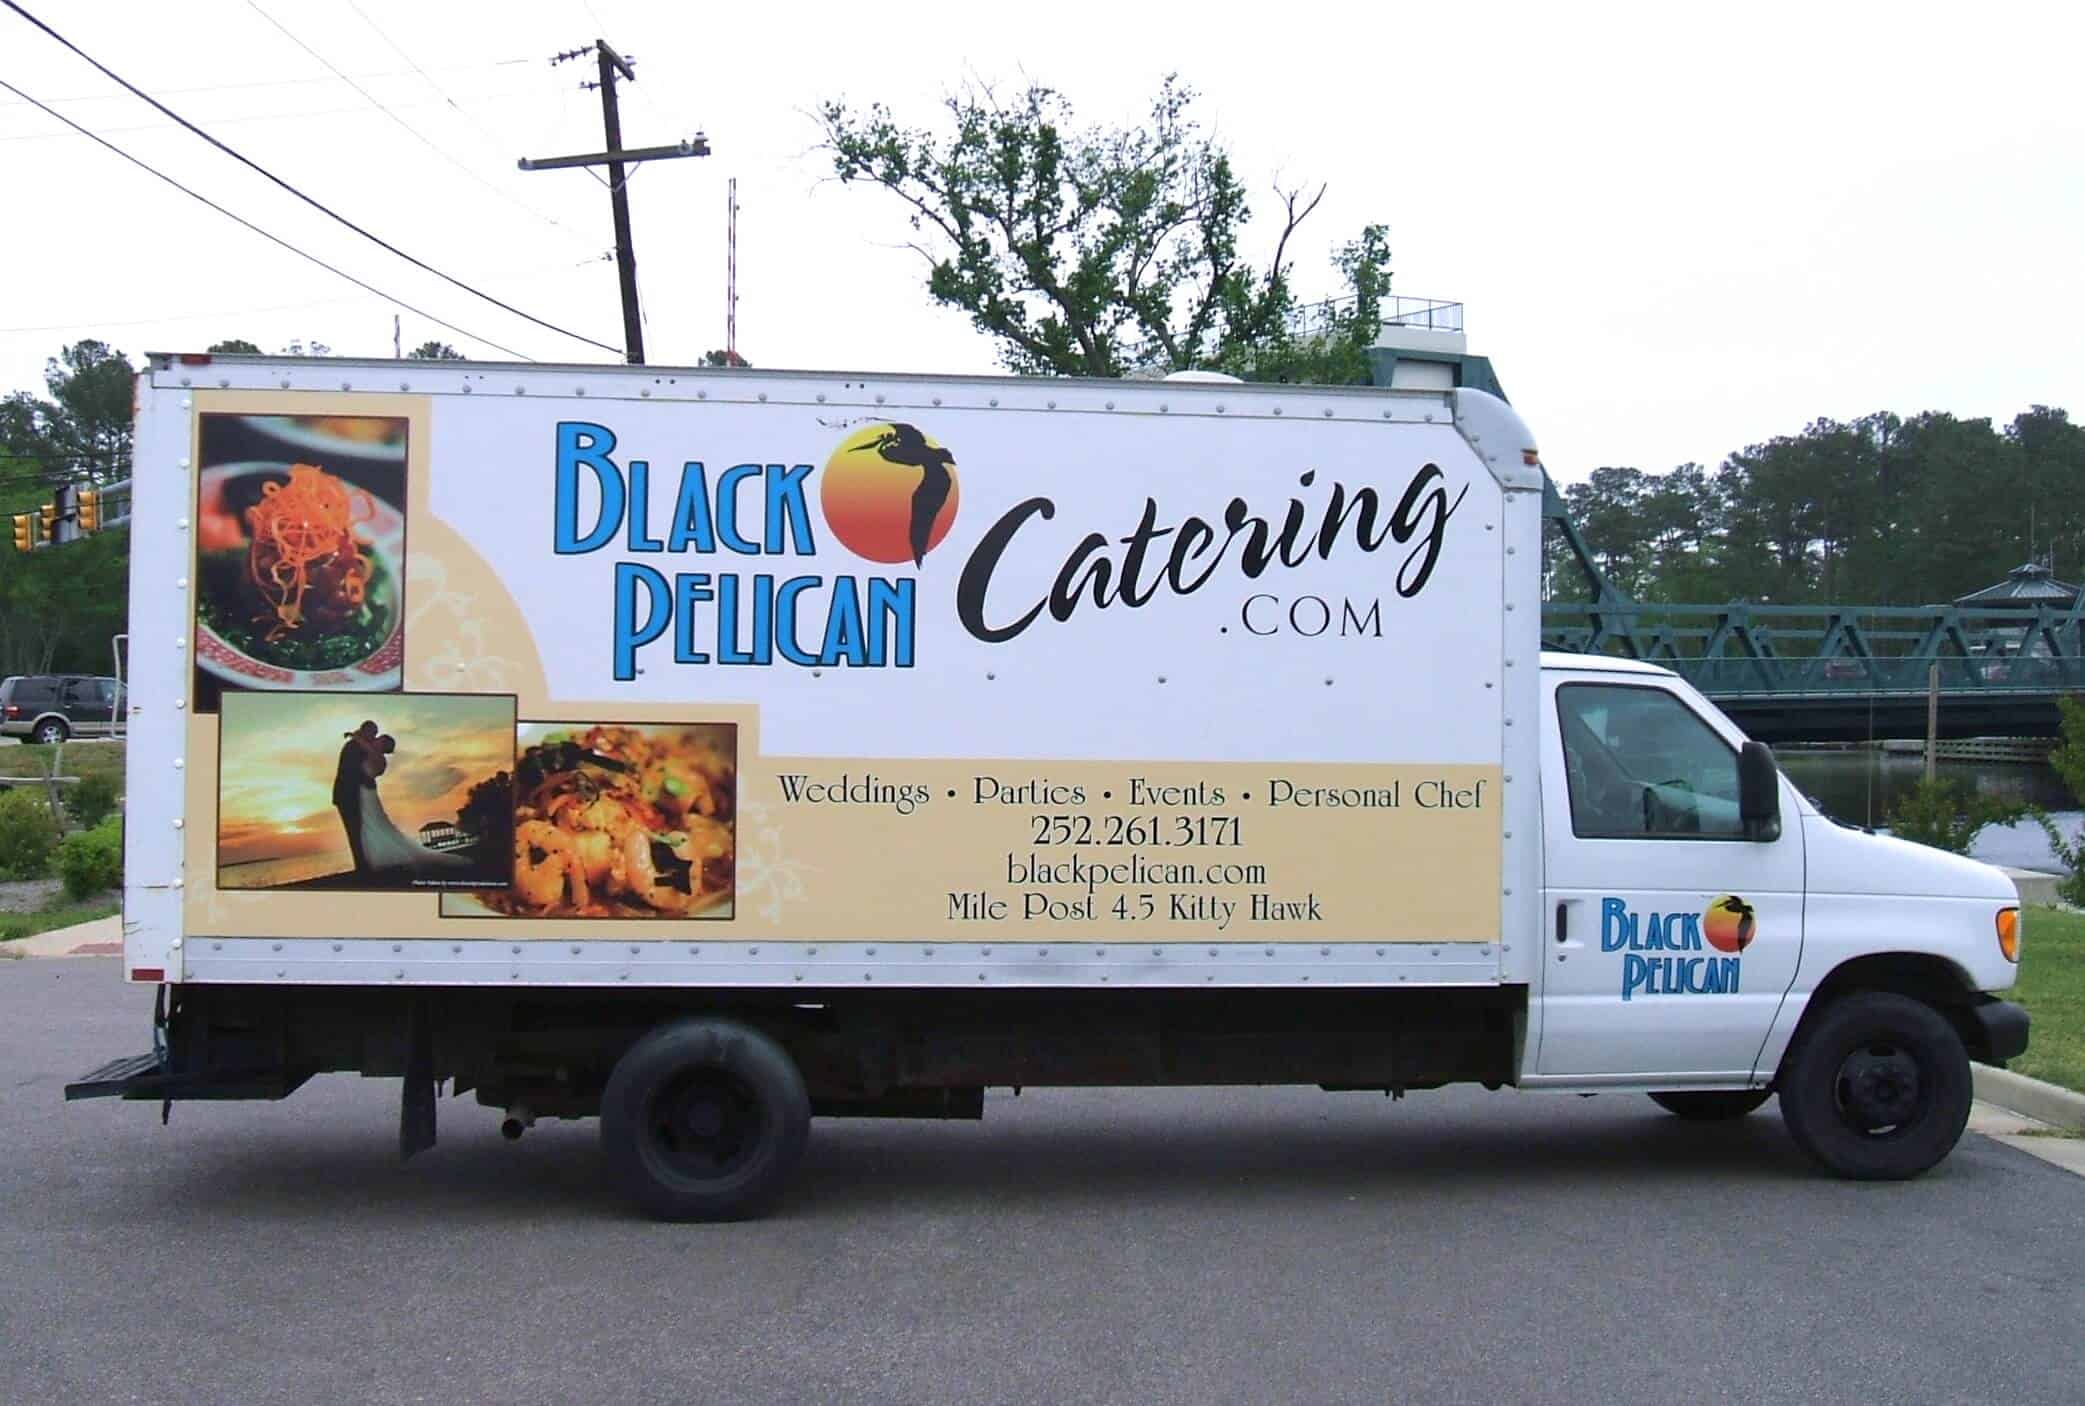 Food truck wrap for Black Pelican Catering